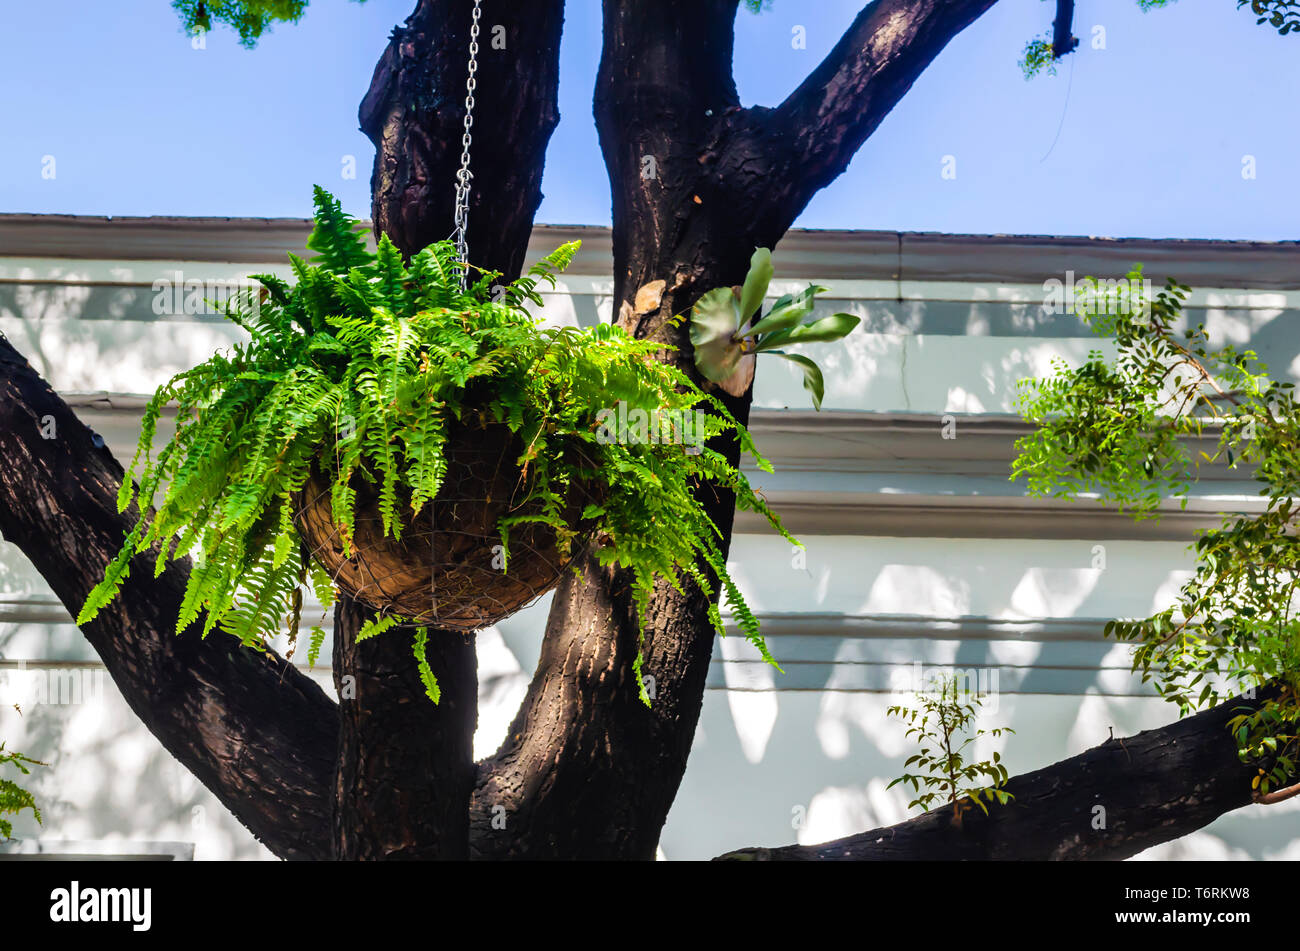 fern hanging in the shade of the branches of a tree decorating the front garden of a colonial house Stock Photo